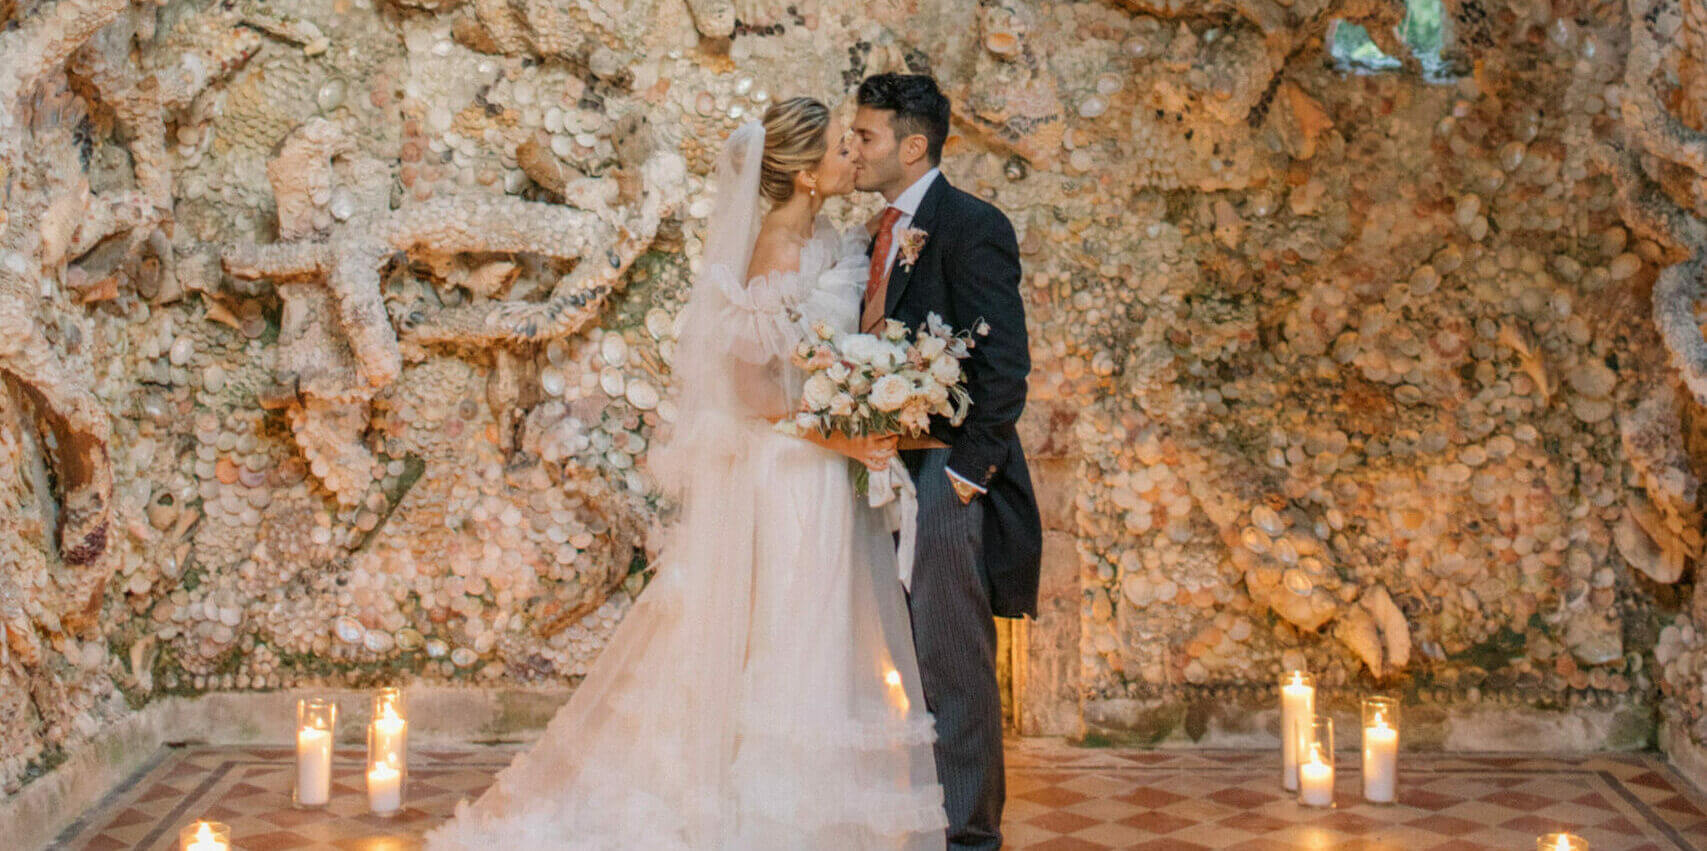 Eccentric Character Shell Grotto Lucy & Shamus Wedding Kiss